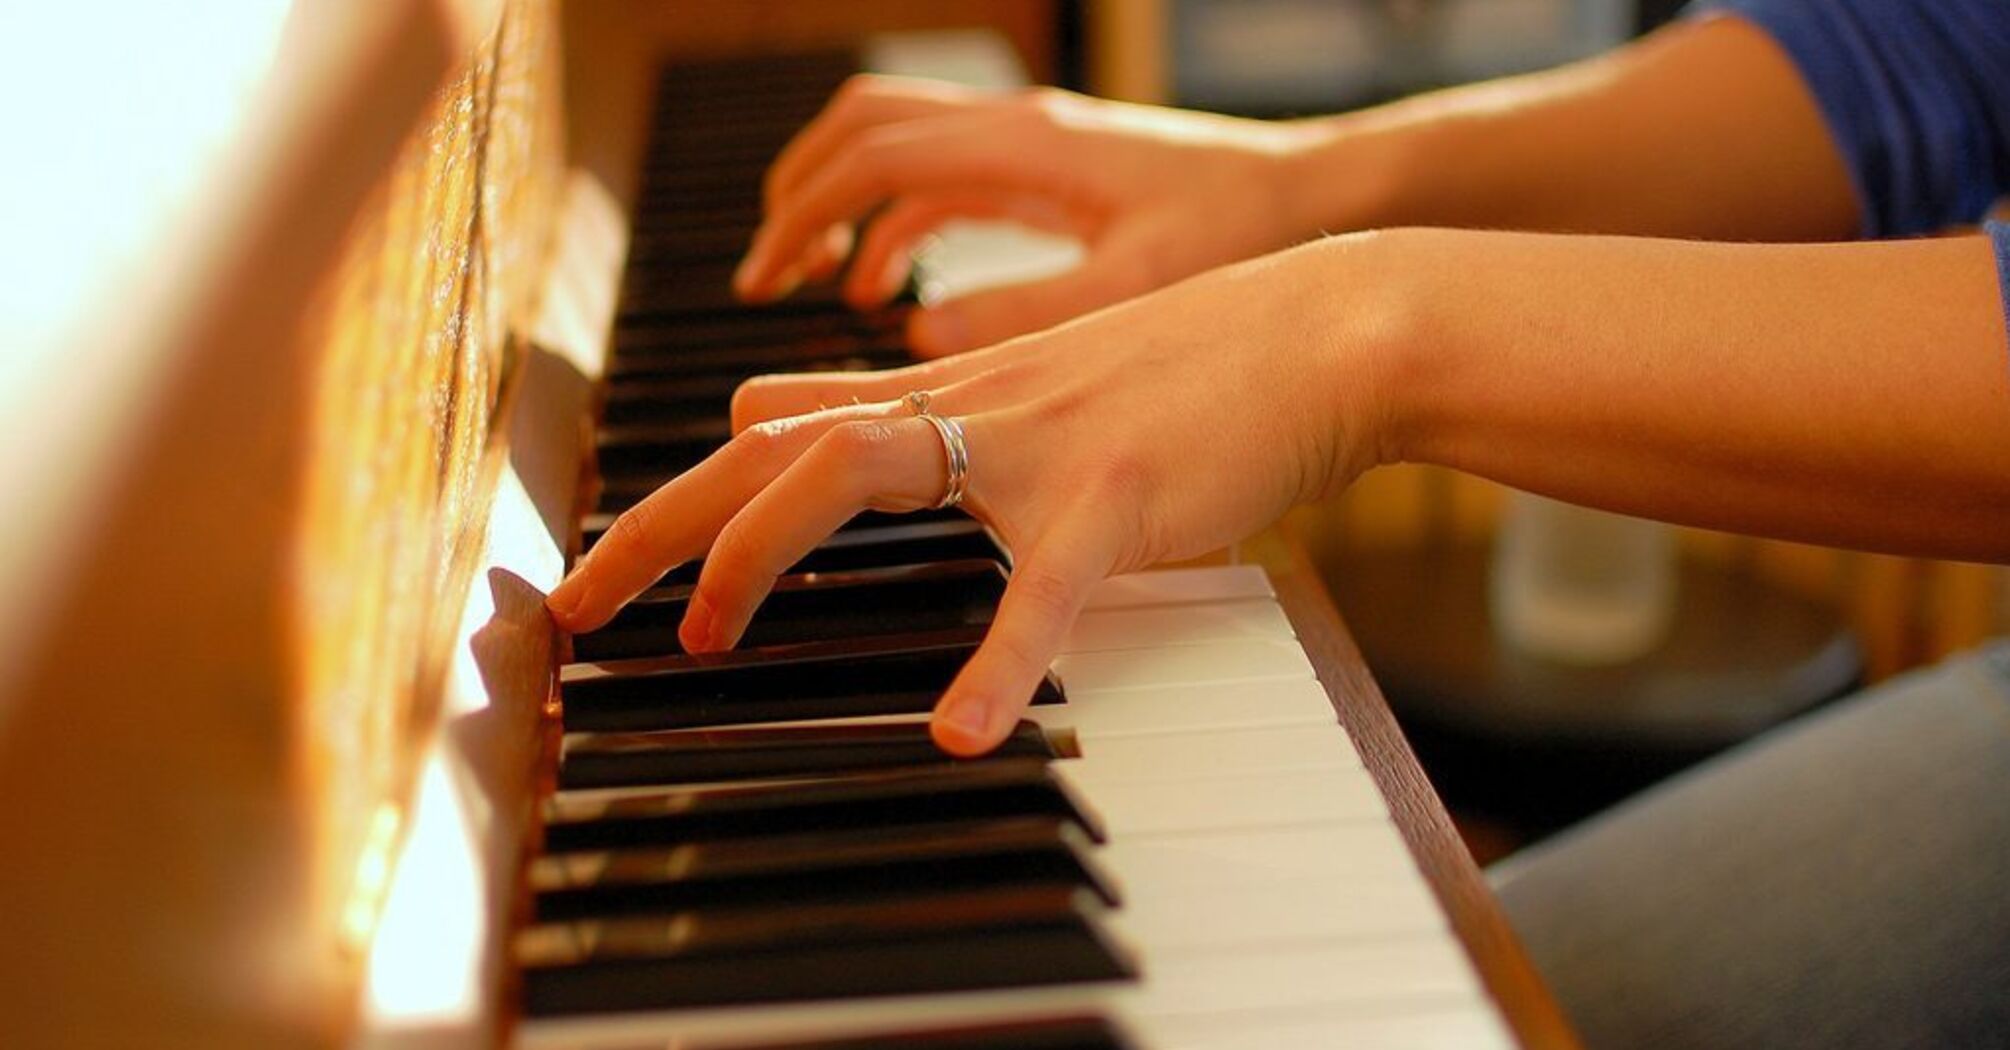 What skills does playing the piano develop